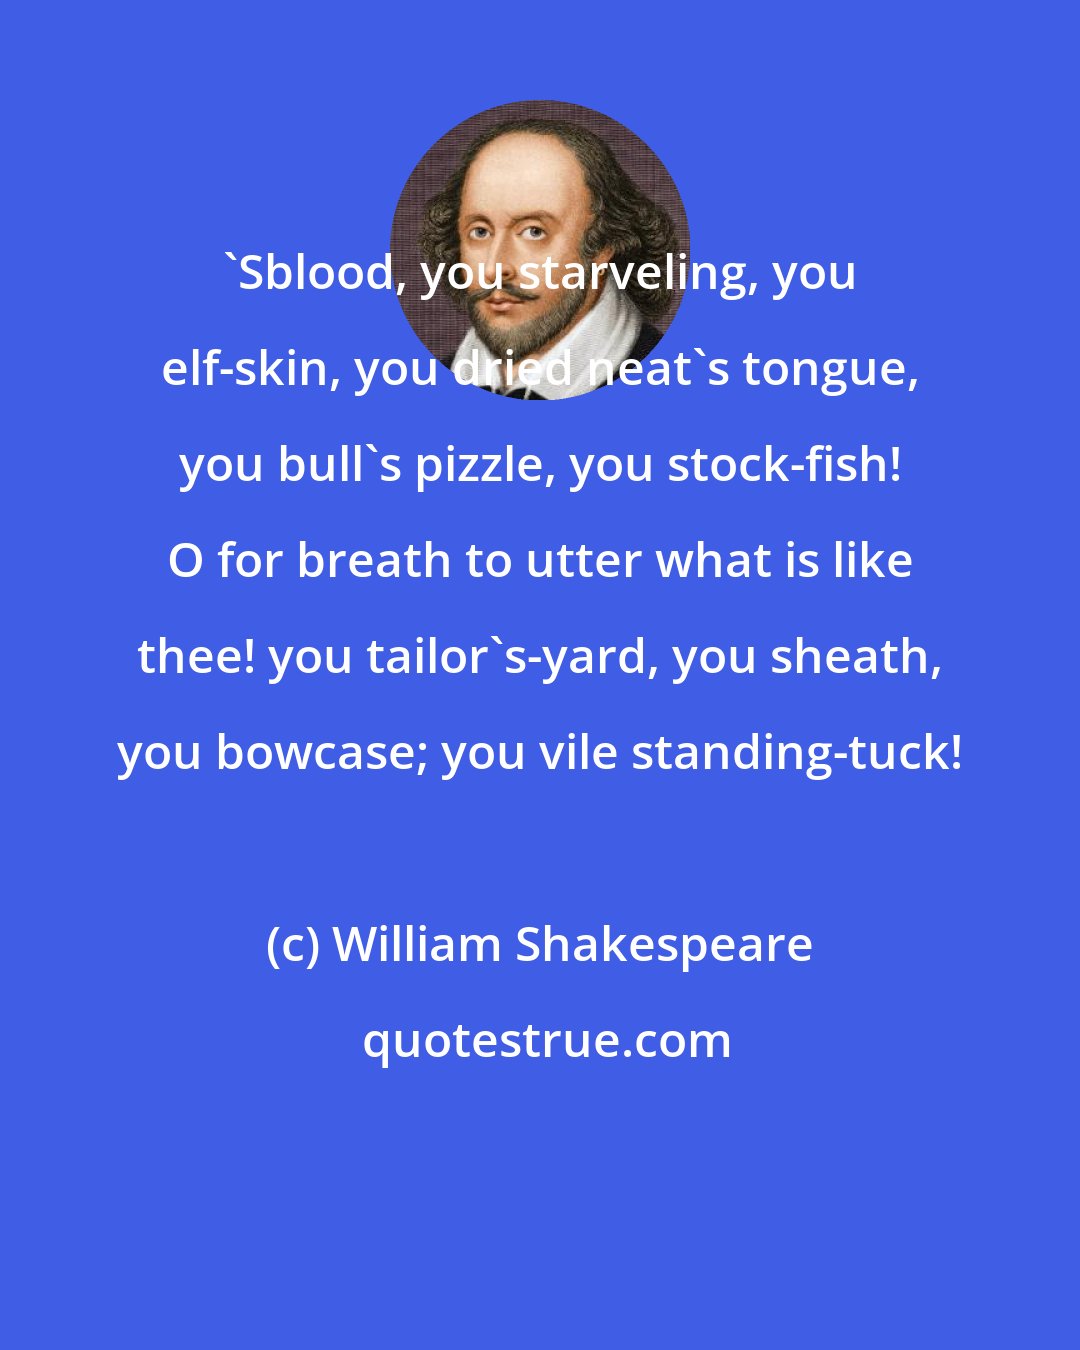 William Shakespeare: 'Sblood, you starveling, you elf-skin, you dried neat's tongue, you bull's pizzle, you stock-fish! O for breath to utter what is like thee! you tailor's-yard, you sheath, you bowcase; you vile standing-tuck!